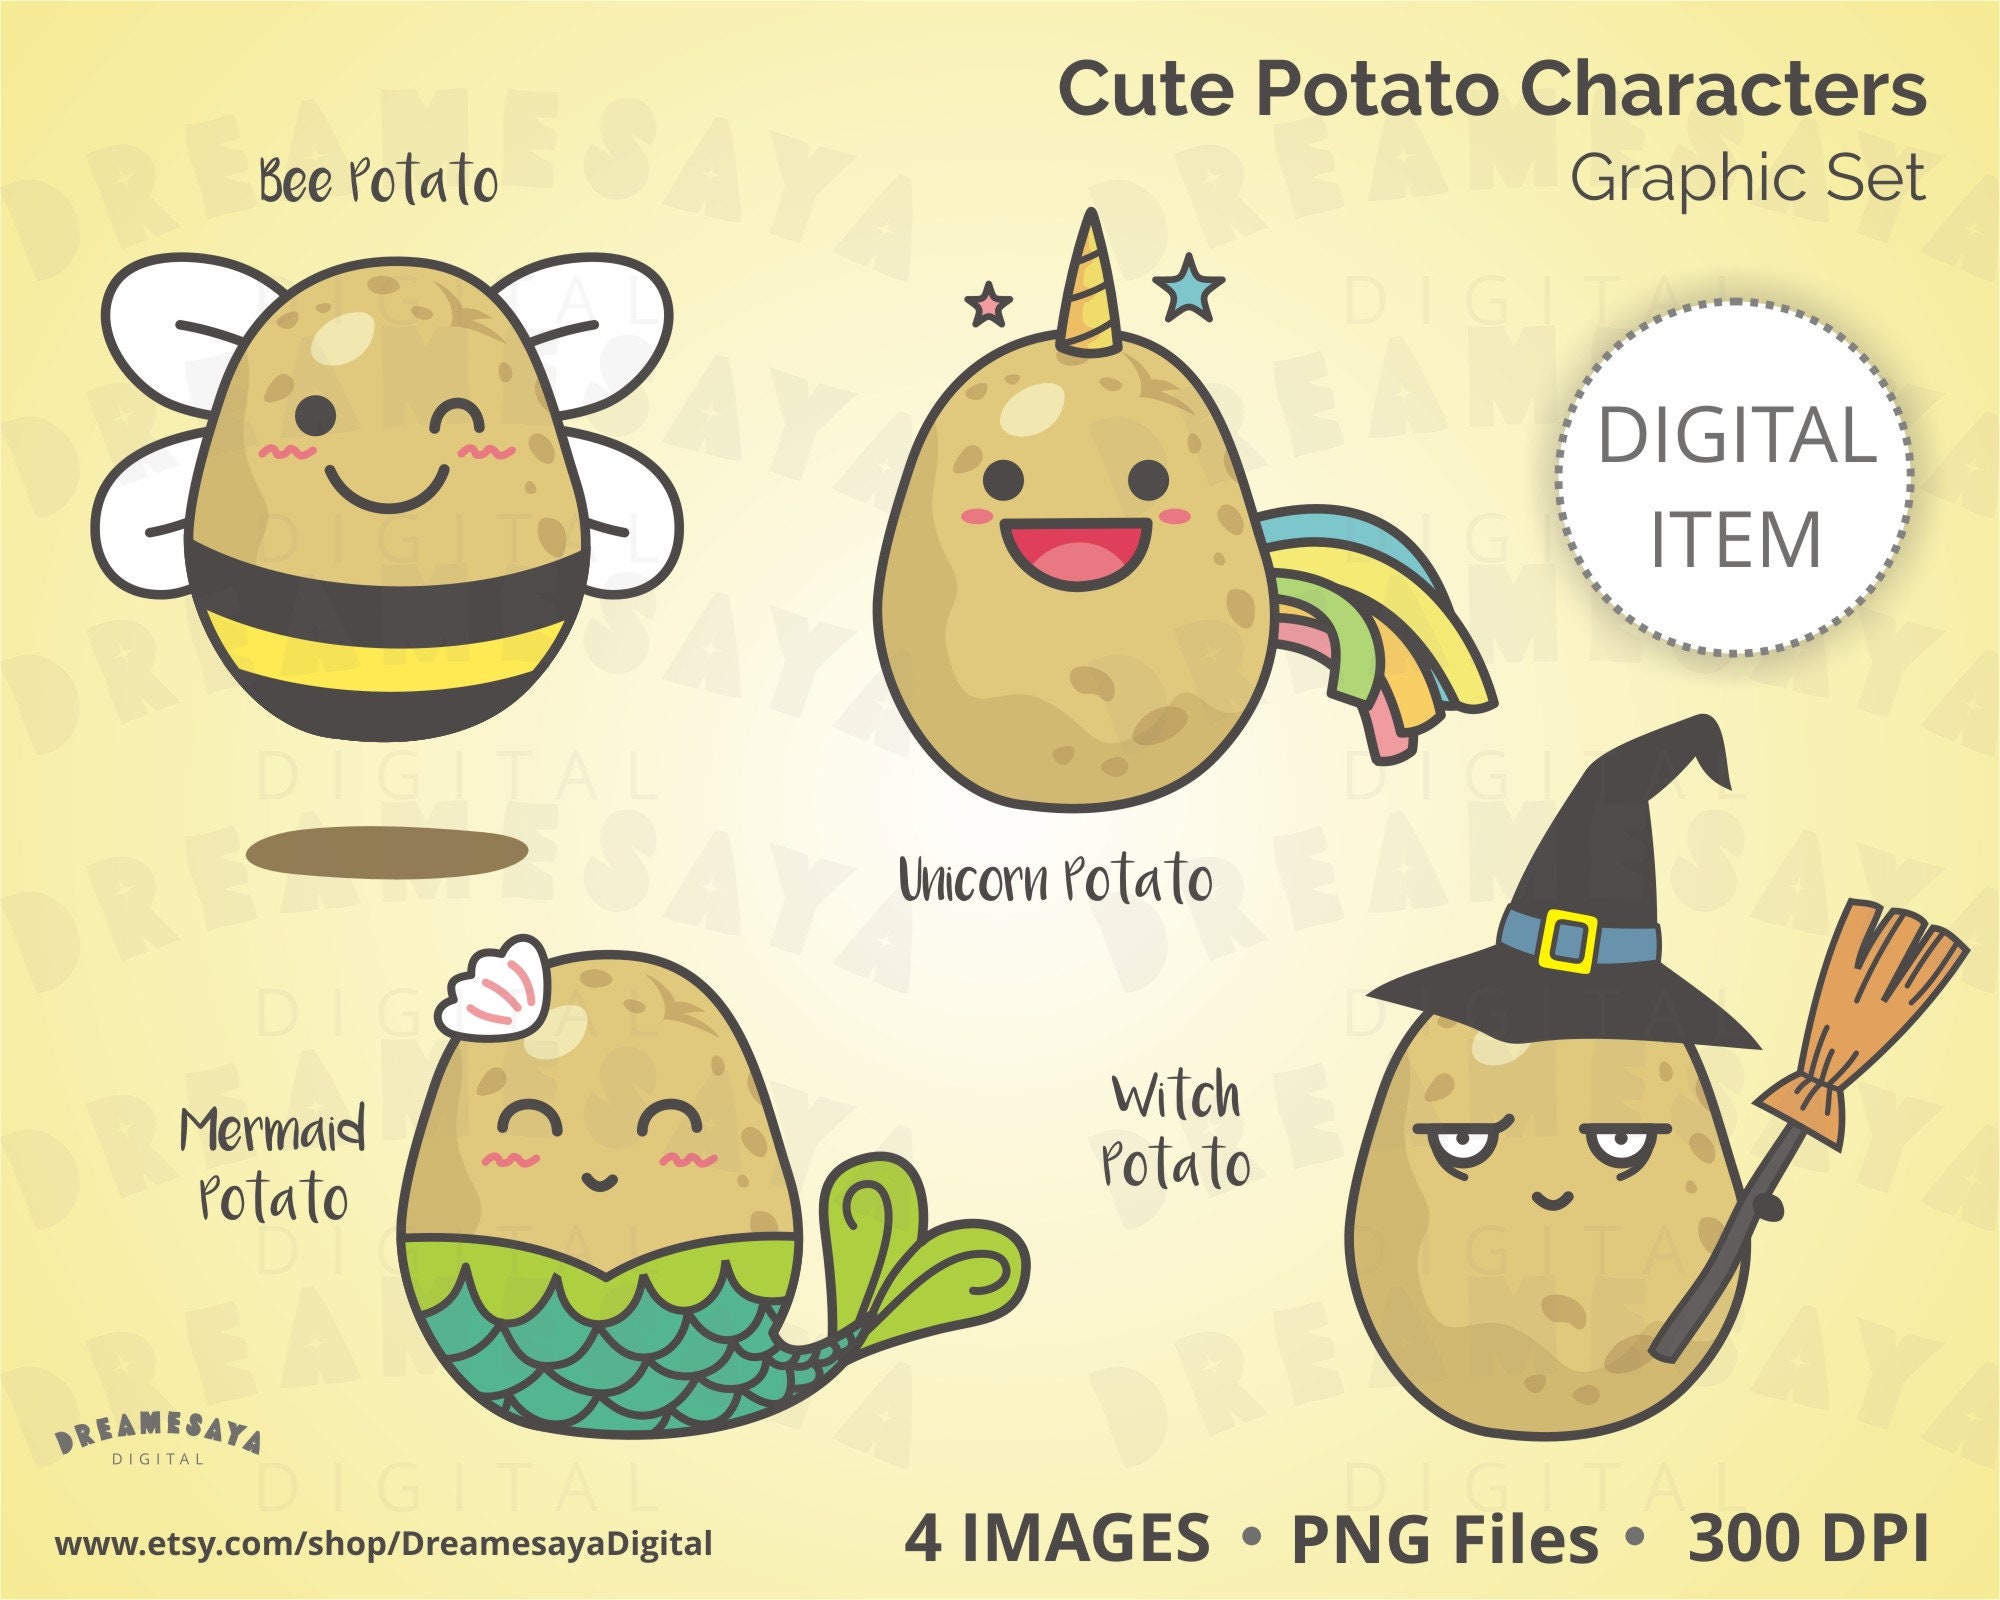 Whimsical Potato Clipart, Cute Graphic of Potatoes as a Bee, Unicorn,  Mermaid, and a Witch, PNG Images for Commercial Use 